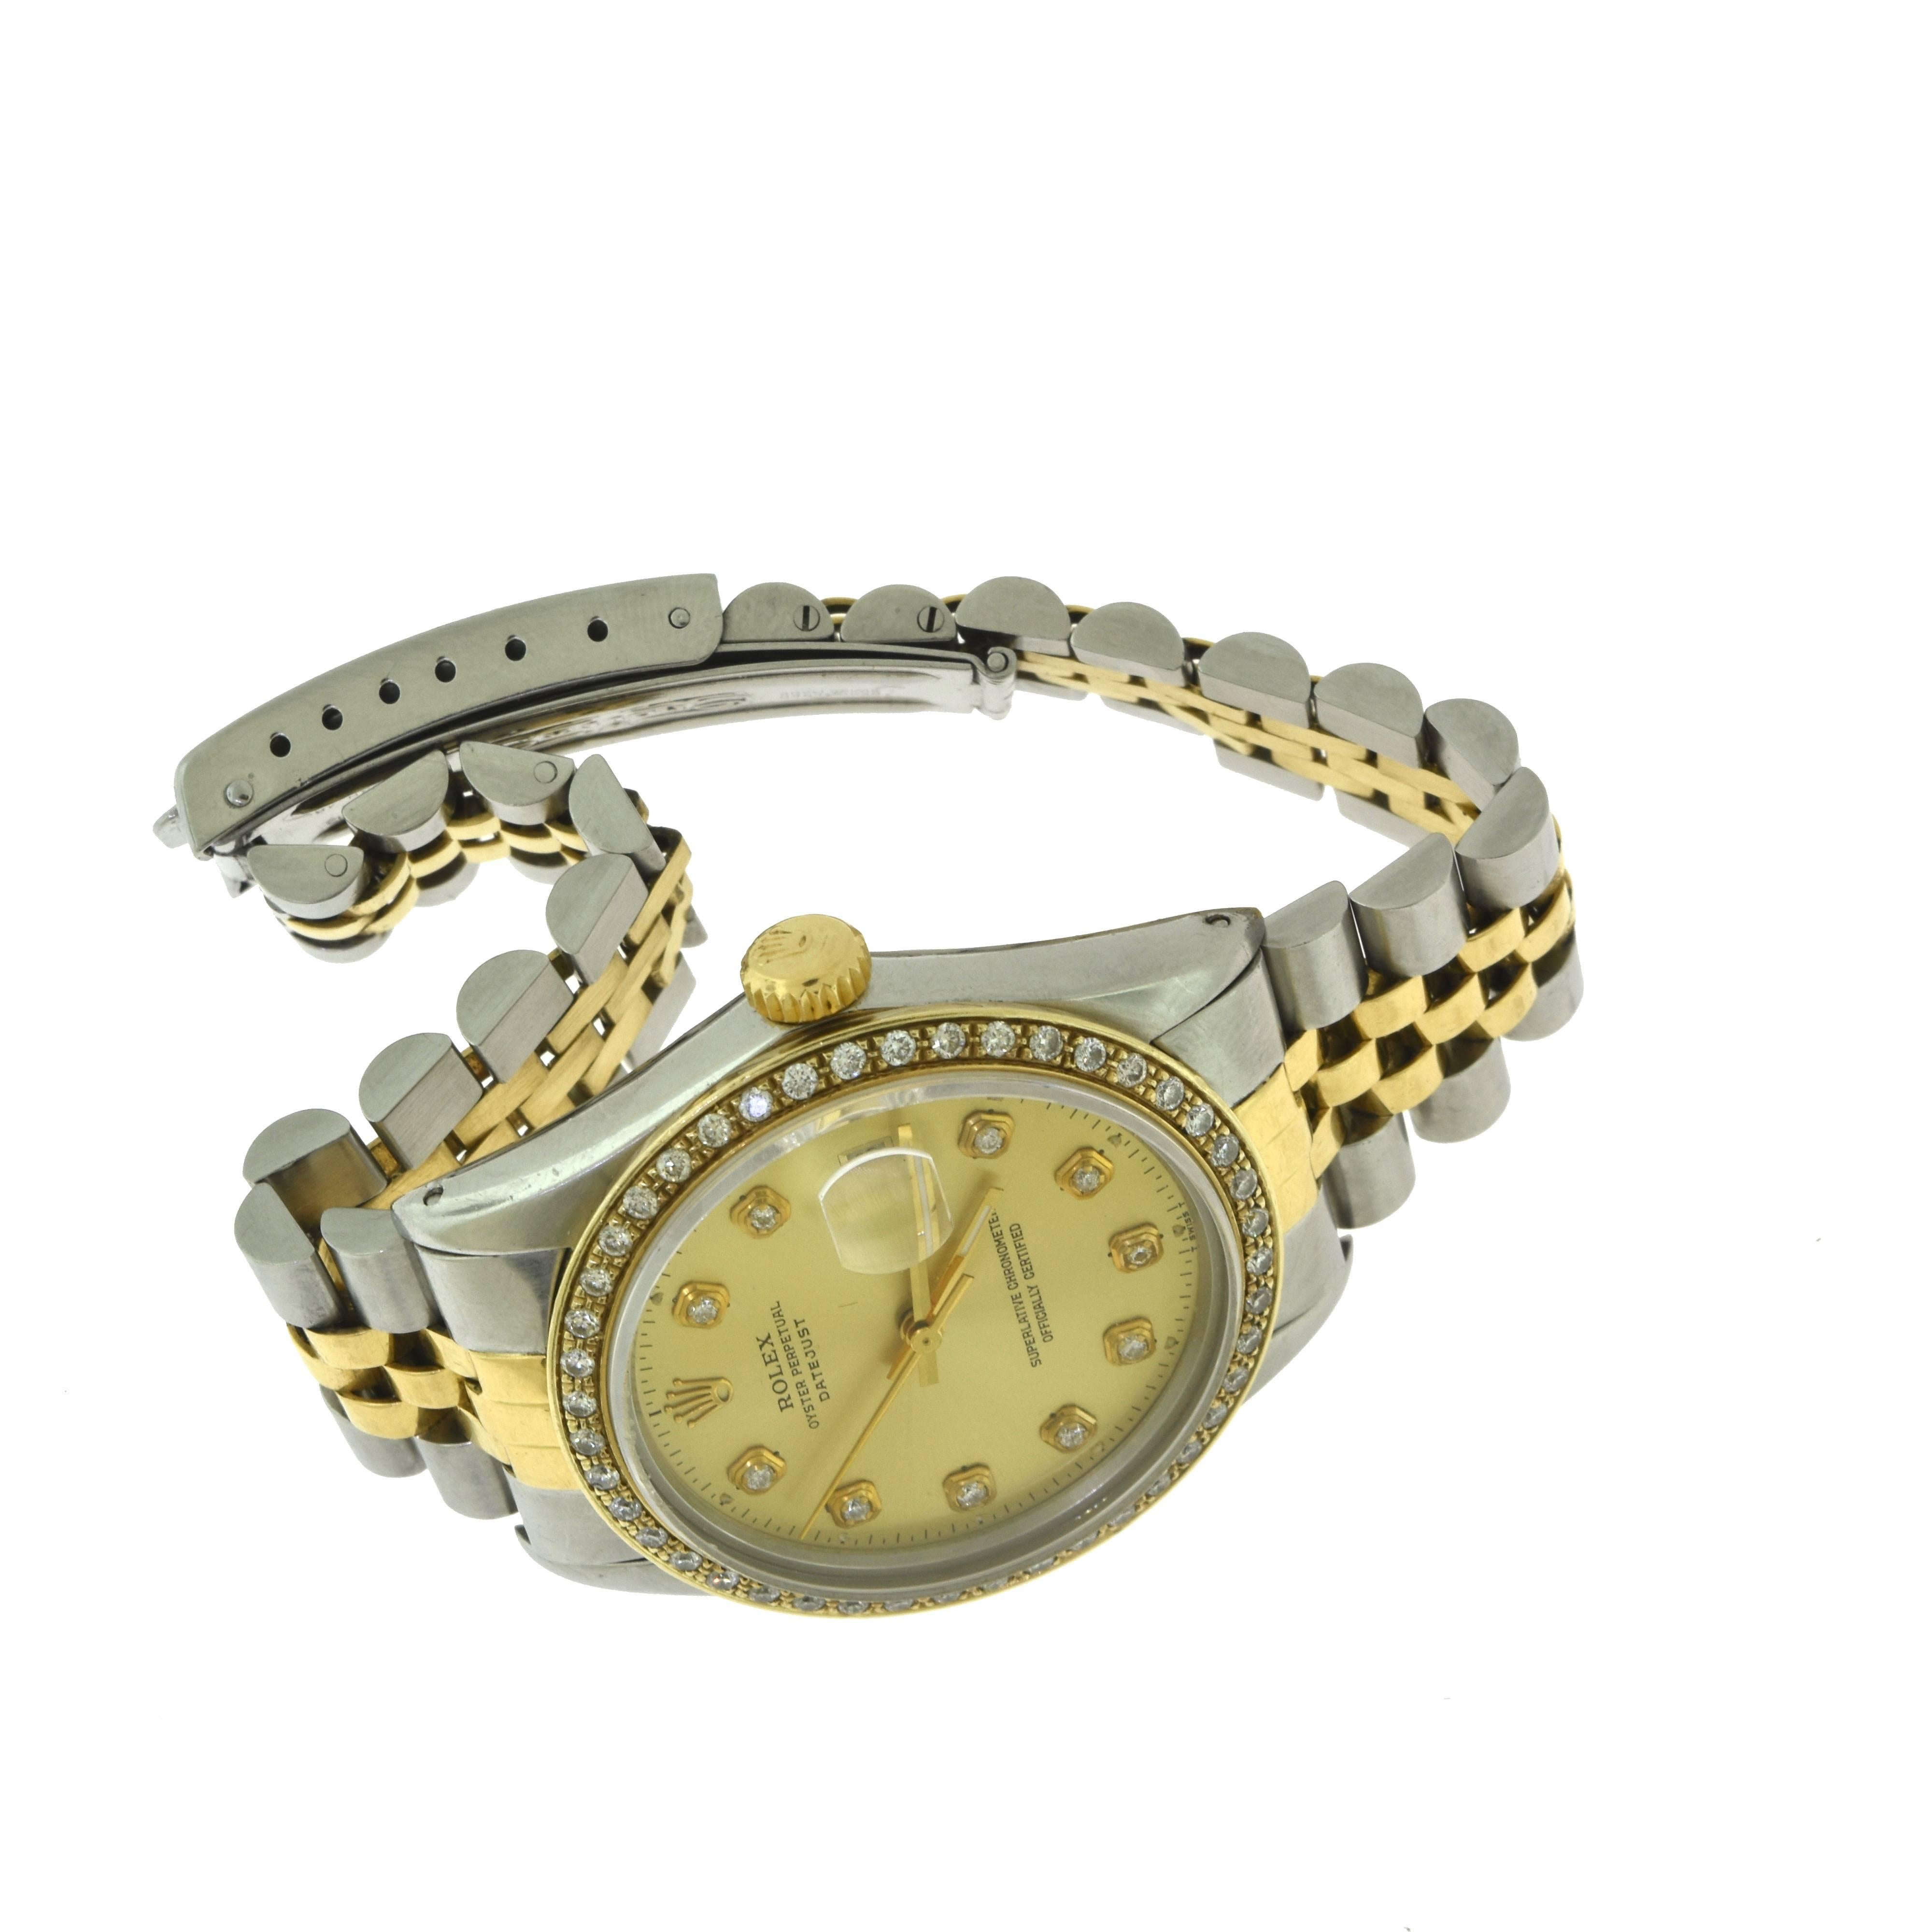 Rolex Datejust 18 Karat Gold/Steelchampagne Diamond Dial and Bezel Watch In Good Condition For Sale In Miami, FL